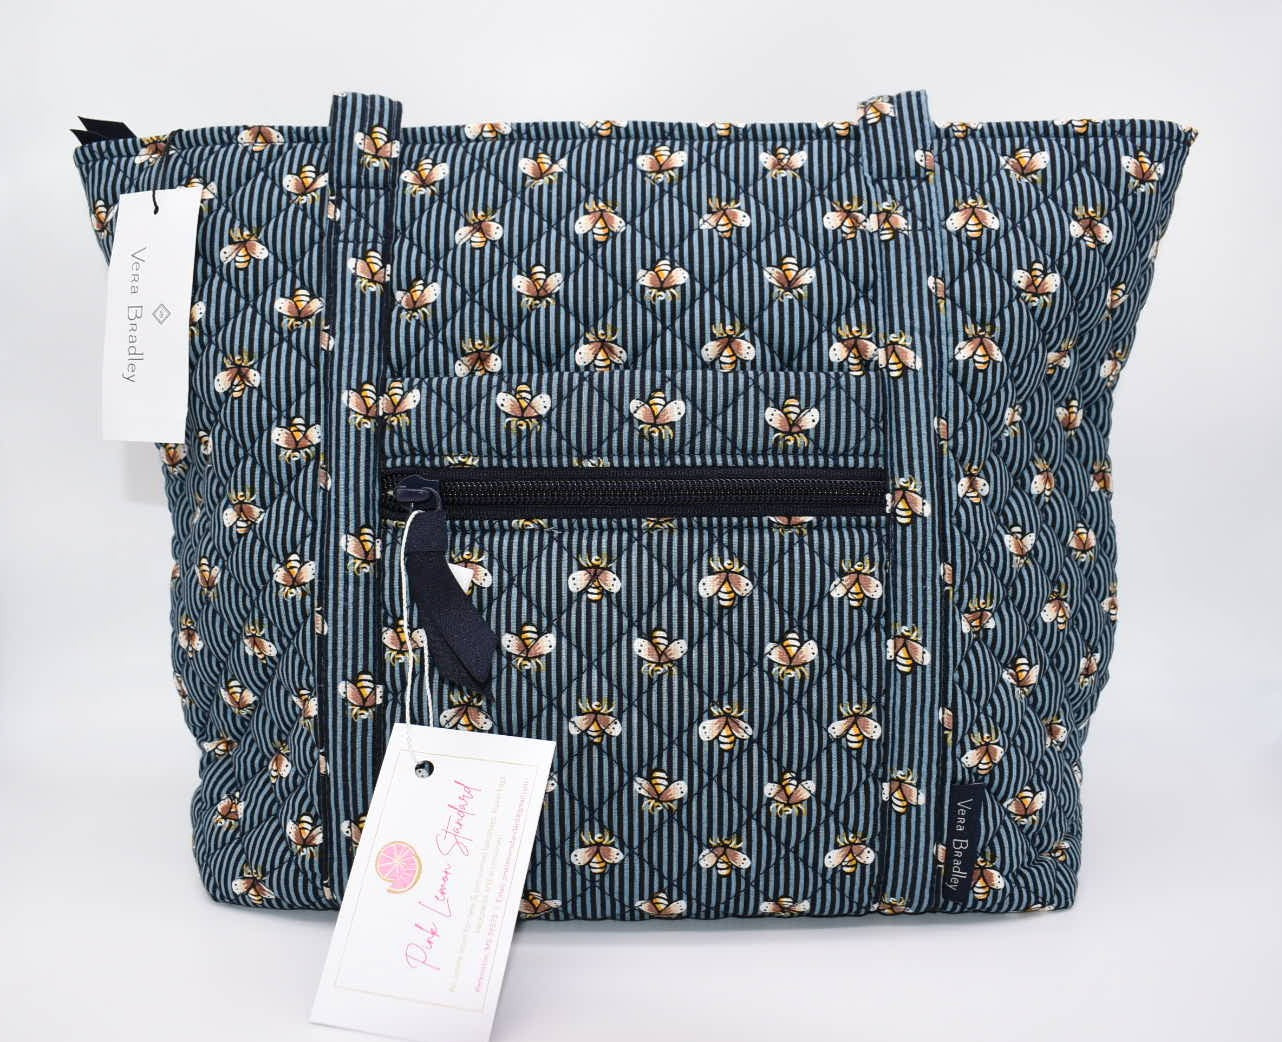 Tory Burch Blake Small Plaid Tote in Tory Navy Multi 